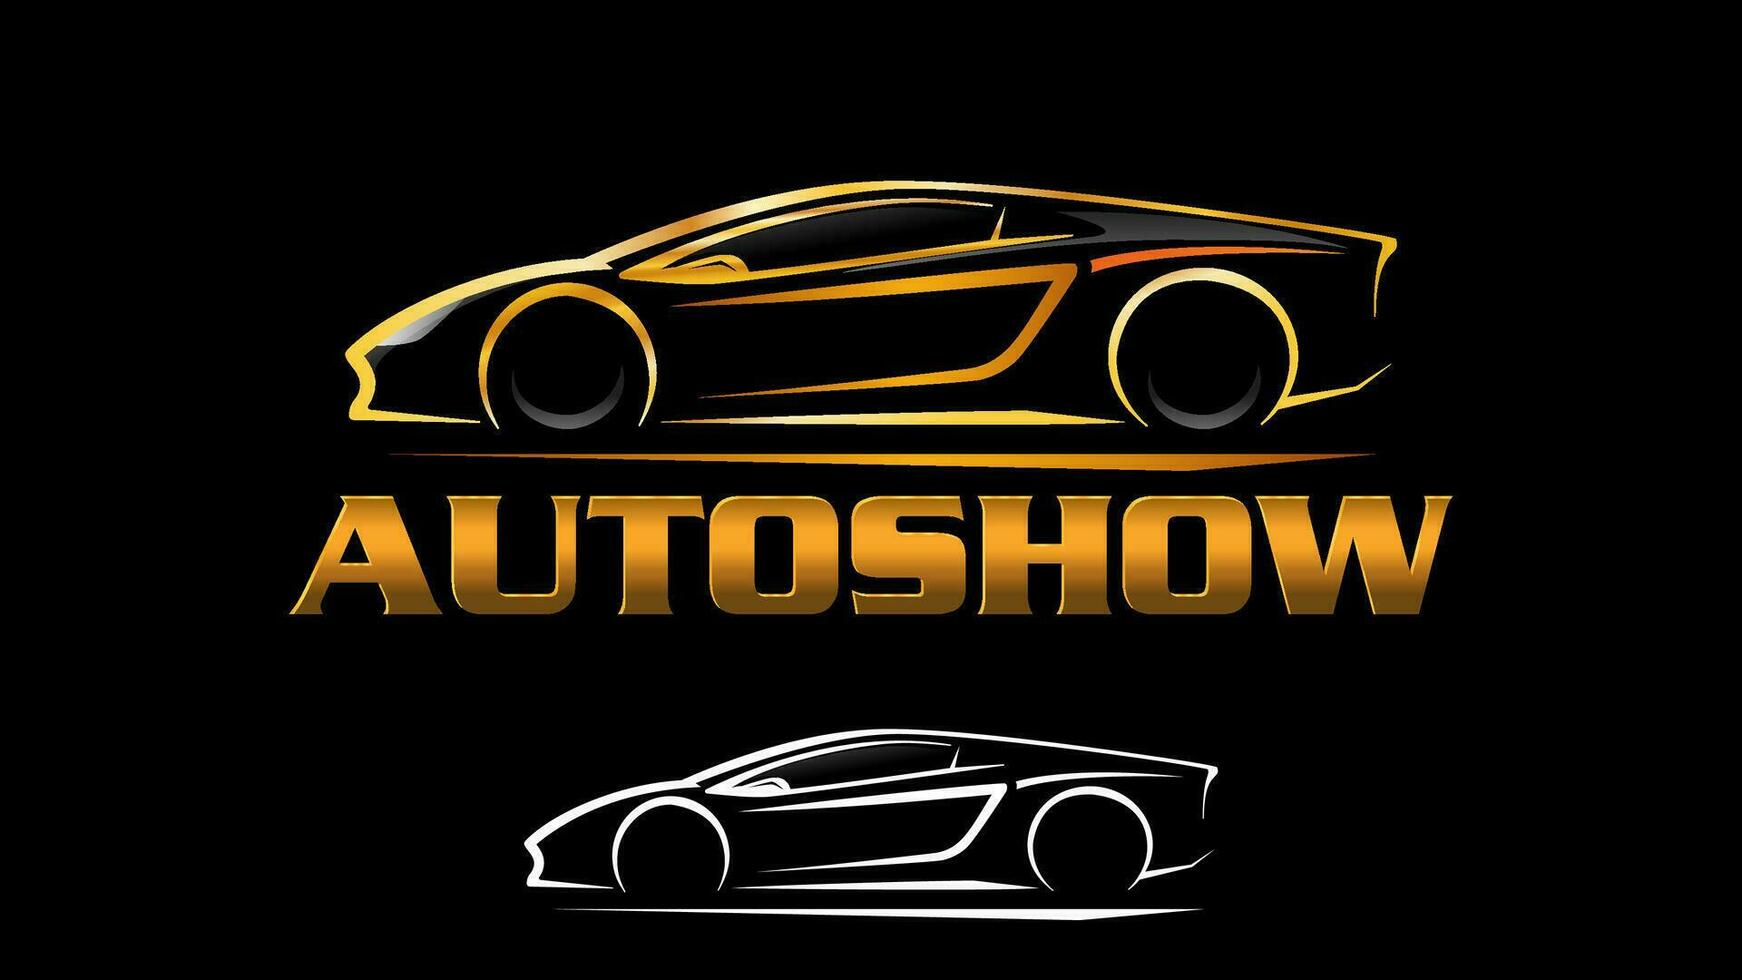 Auto Show Car Logo Vector Illustration. Suitable for any business related to car show or automotive industry